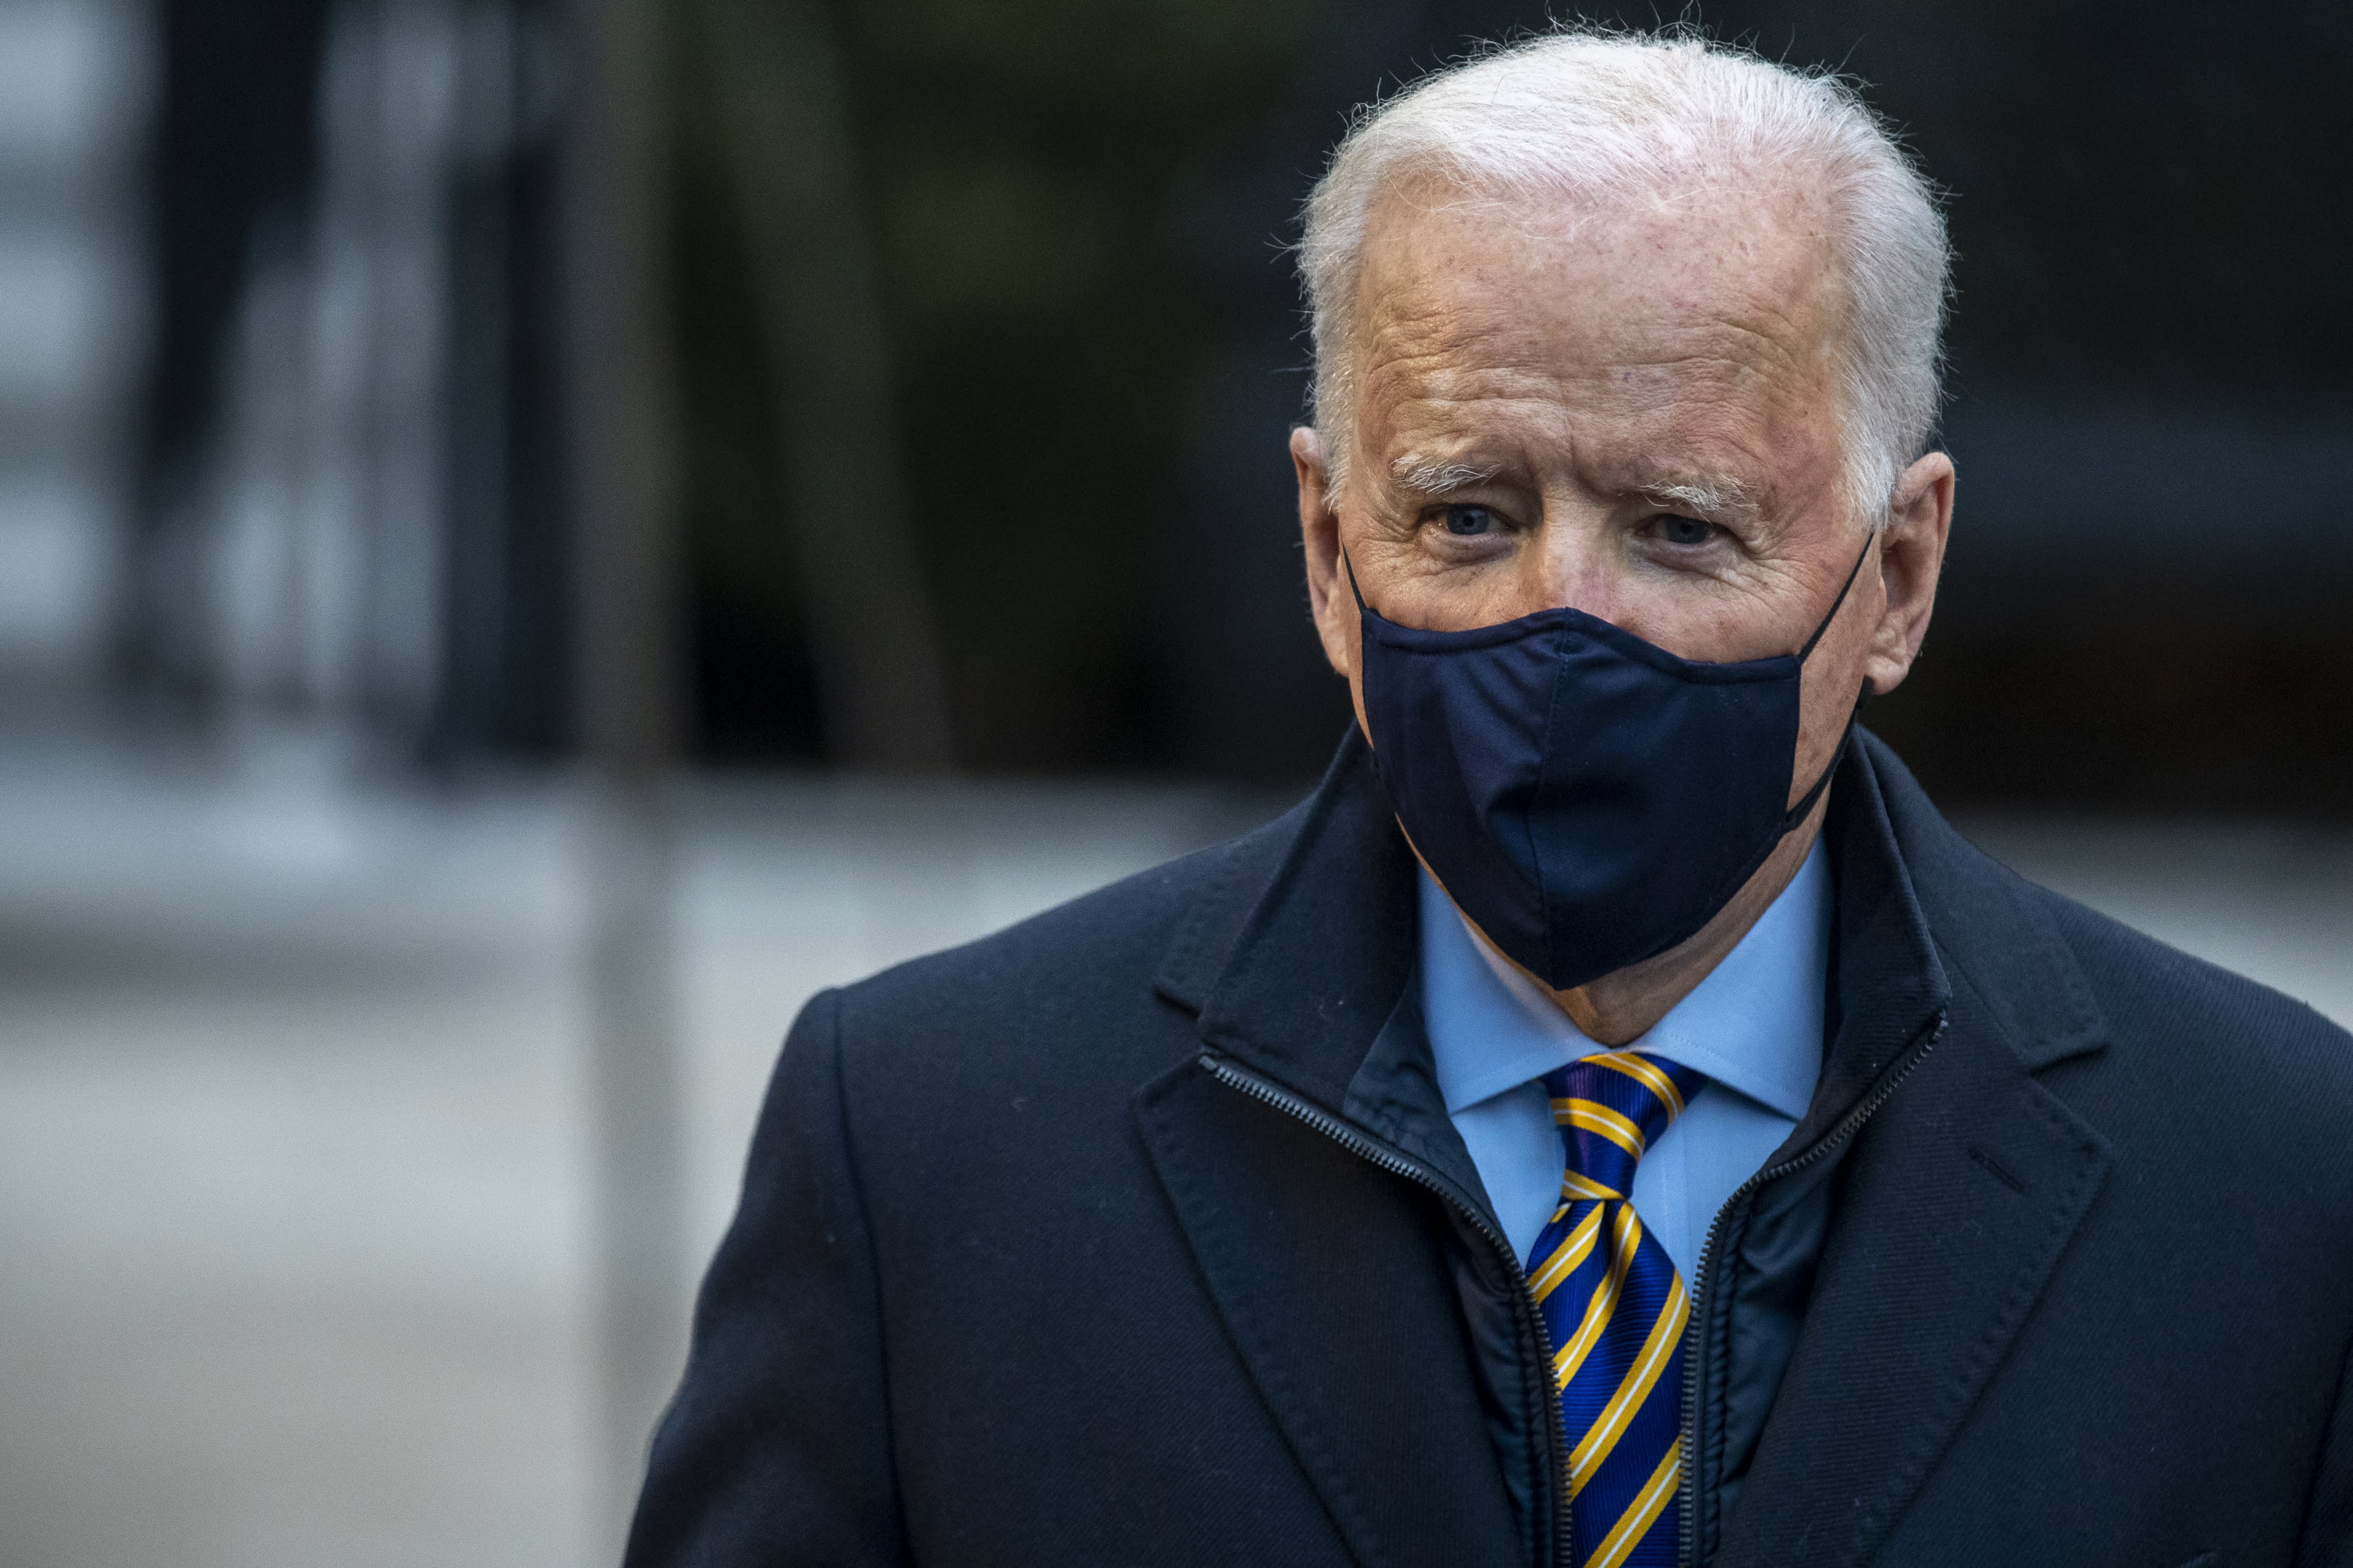 State attorneys are urging Biden to forgive $ 50,000 in student debt